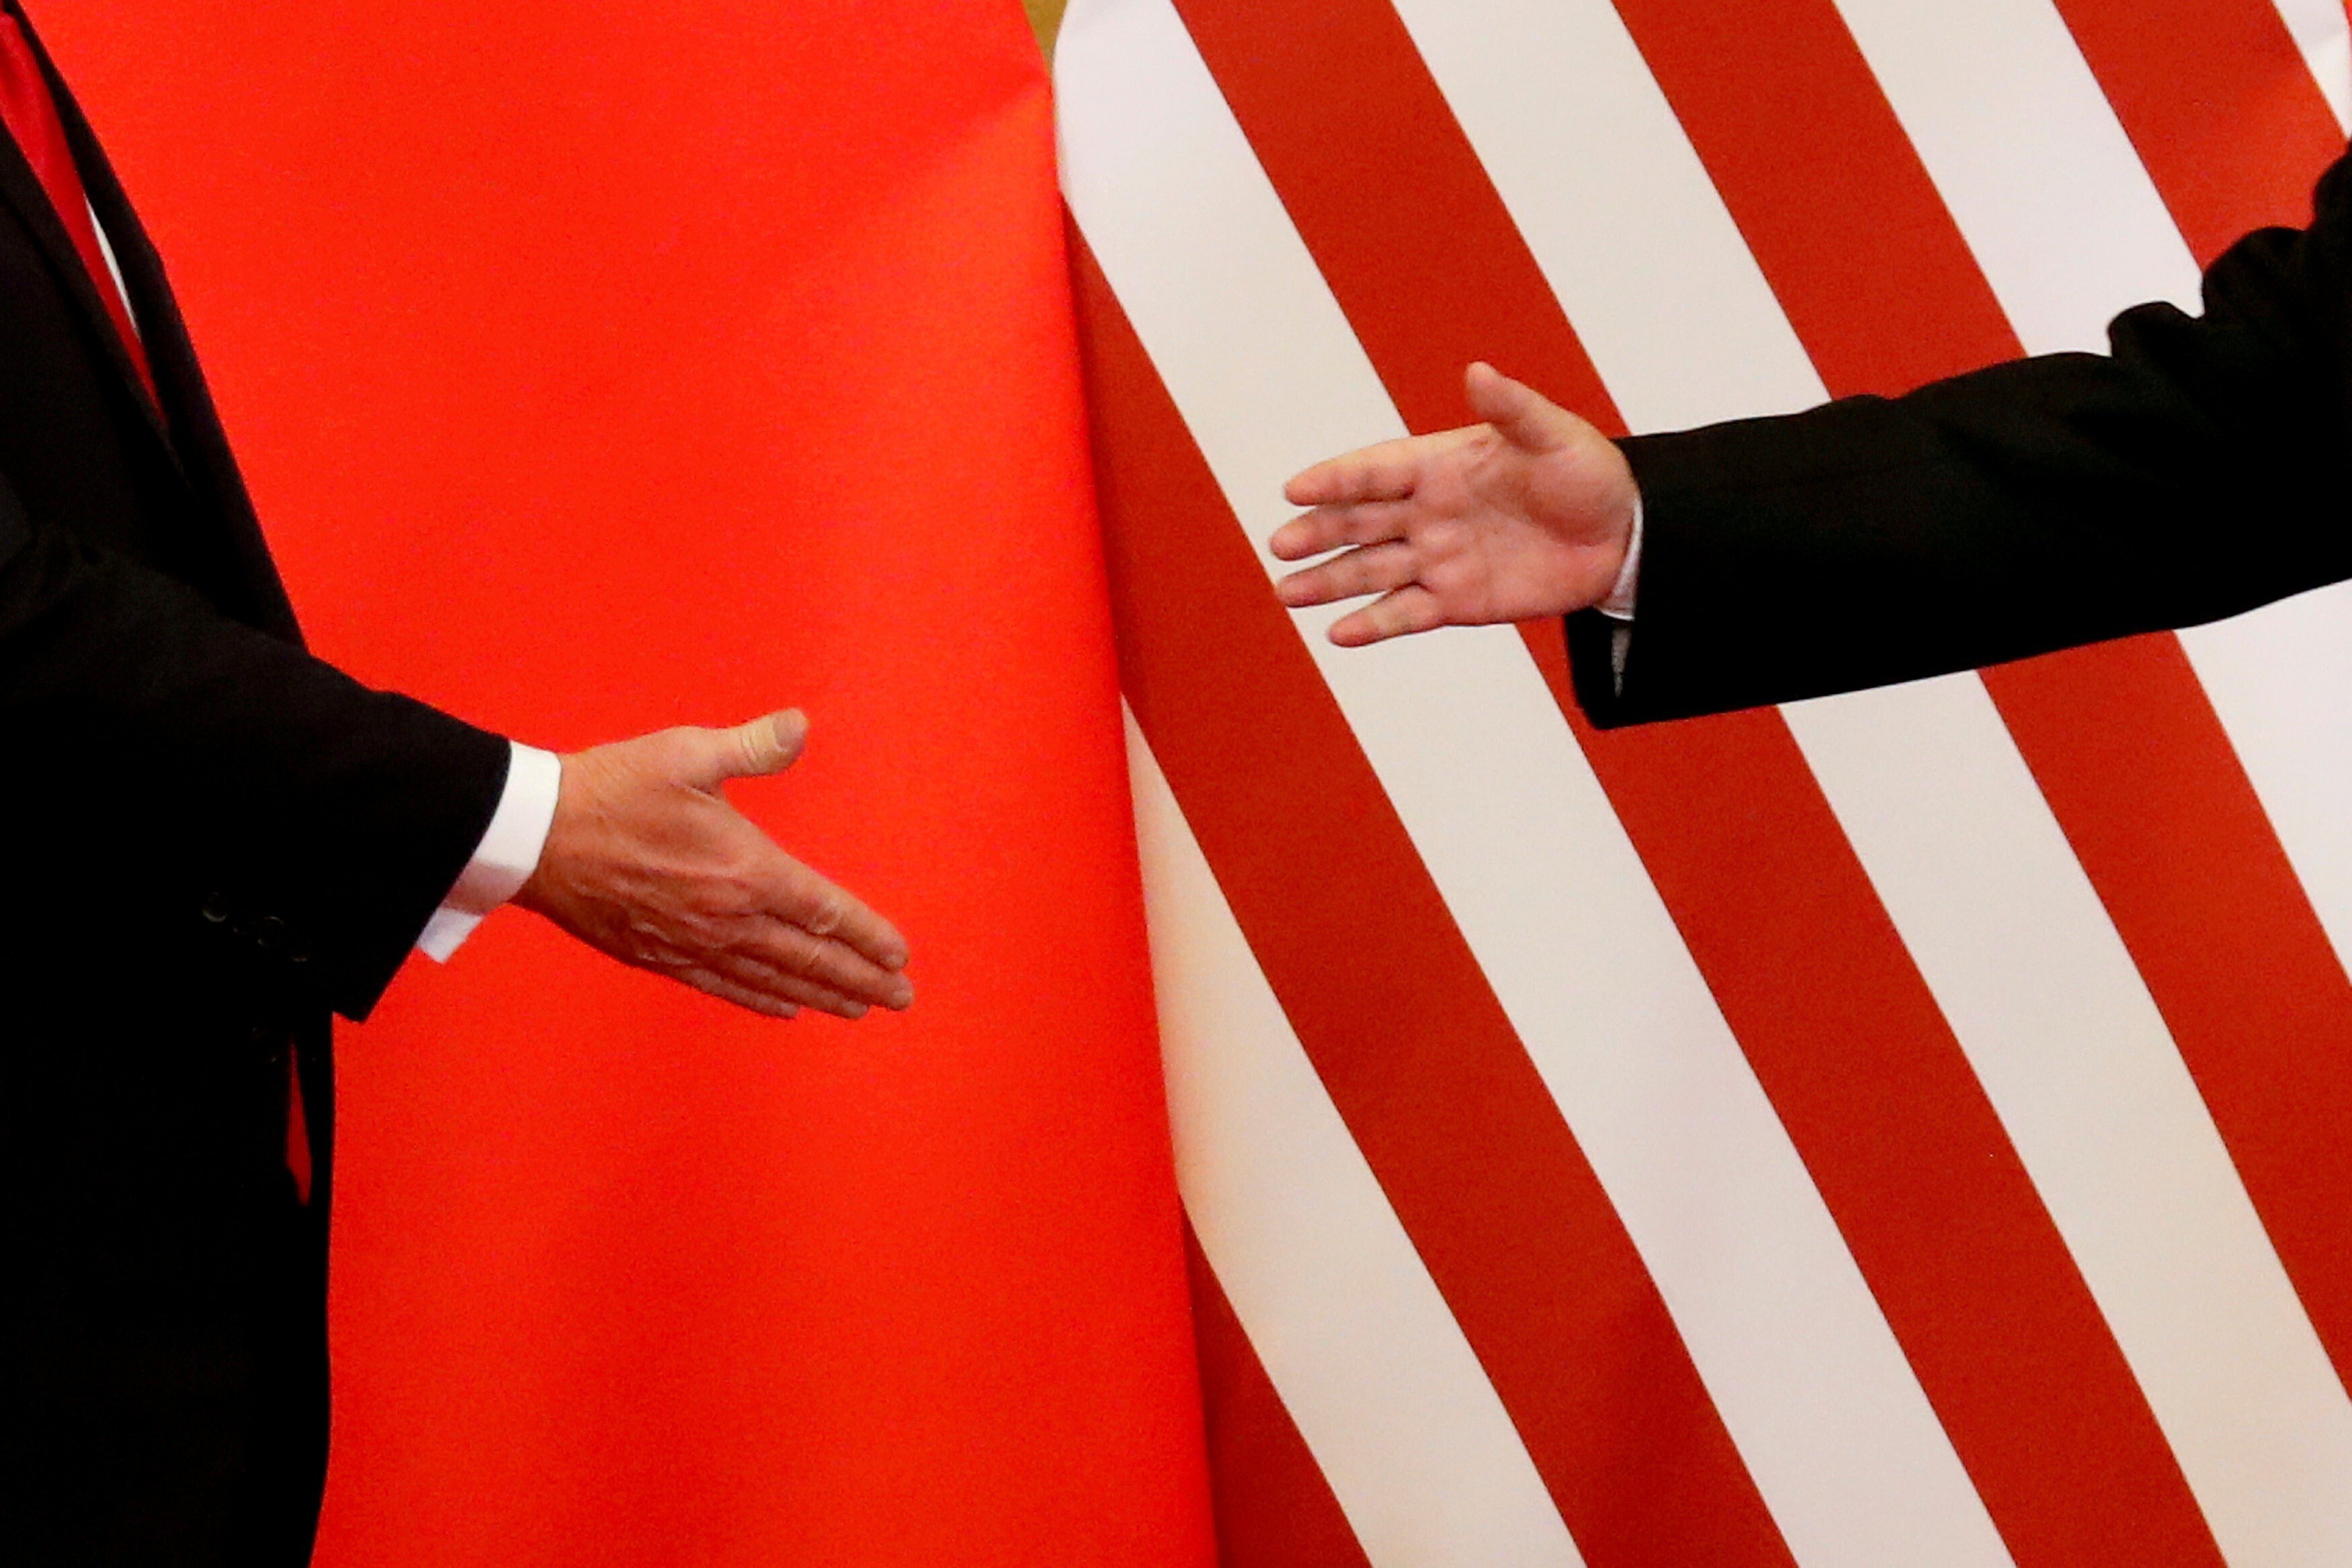 Traditional routes of engagement between China and the US are no longer operating as effectively as they used to. Photo: Reuters